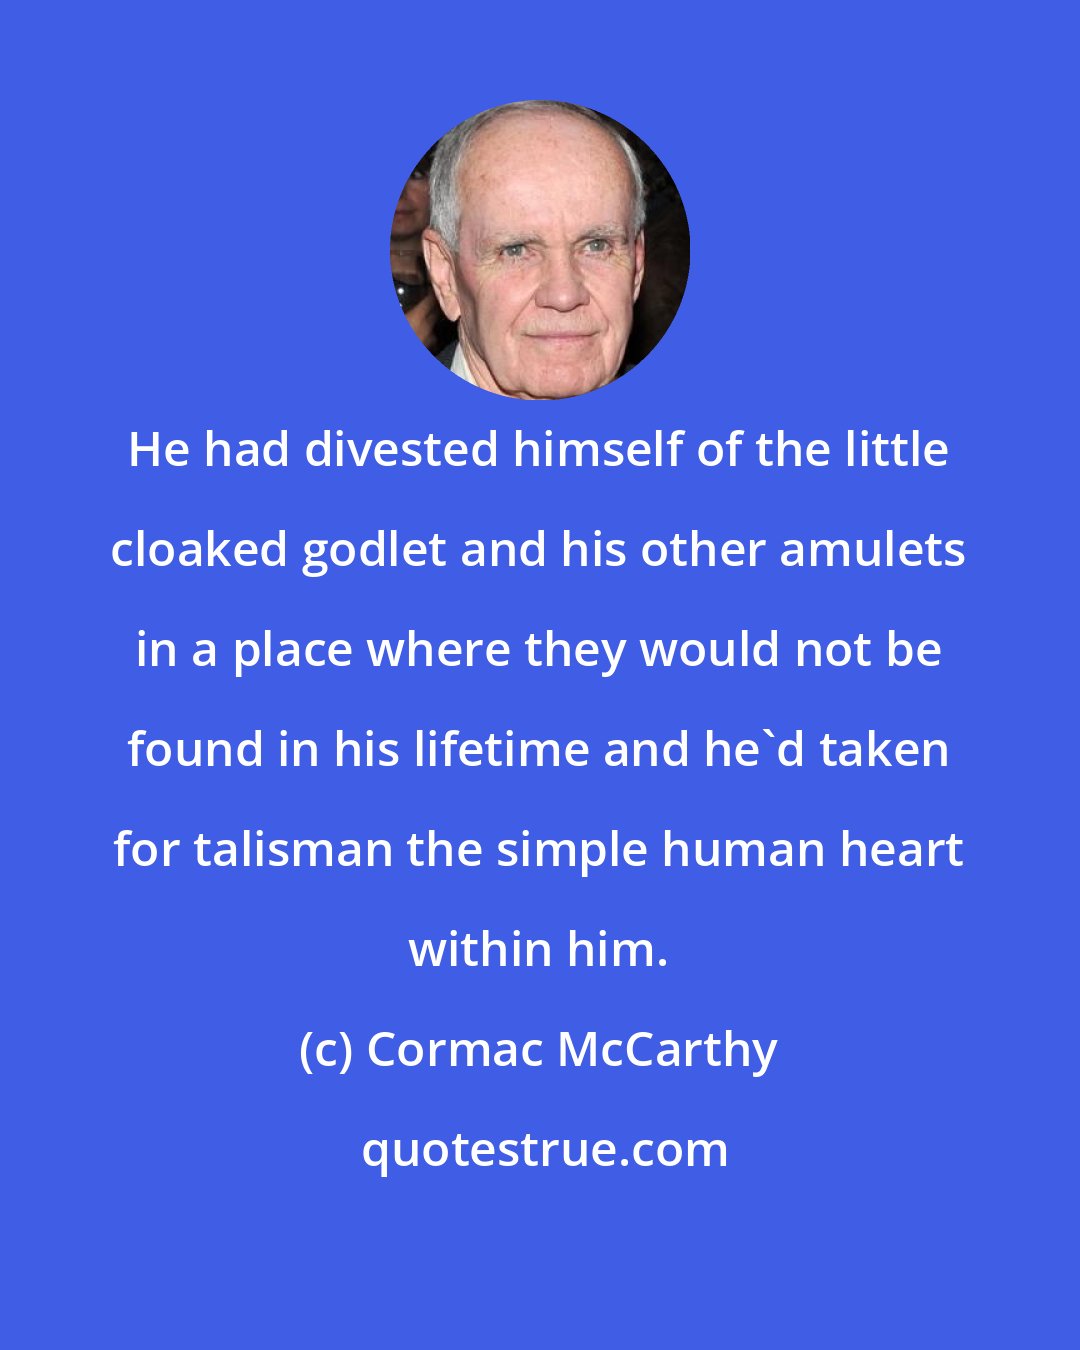 Cormac McCarthy: He had divested himself of the little cloaked godlet and his other amulets in a place where they would not be found in his lifetime and he'd taken for talisman the simple human heart within him.